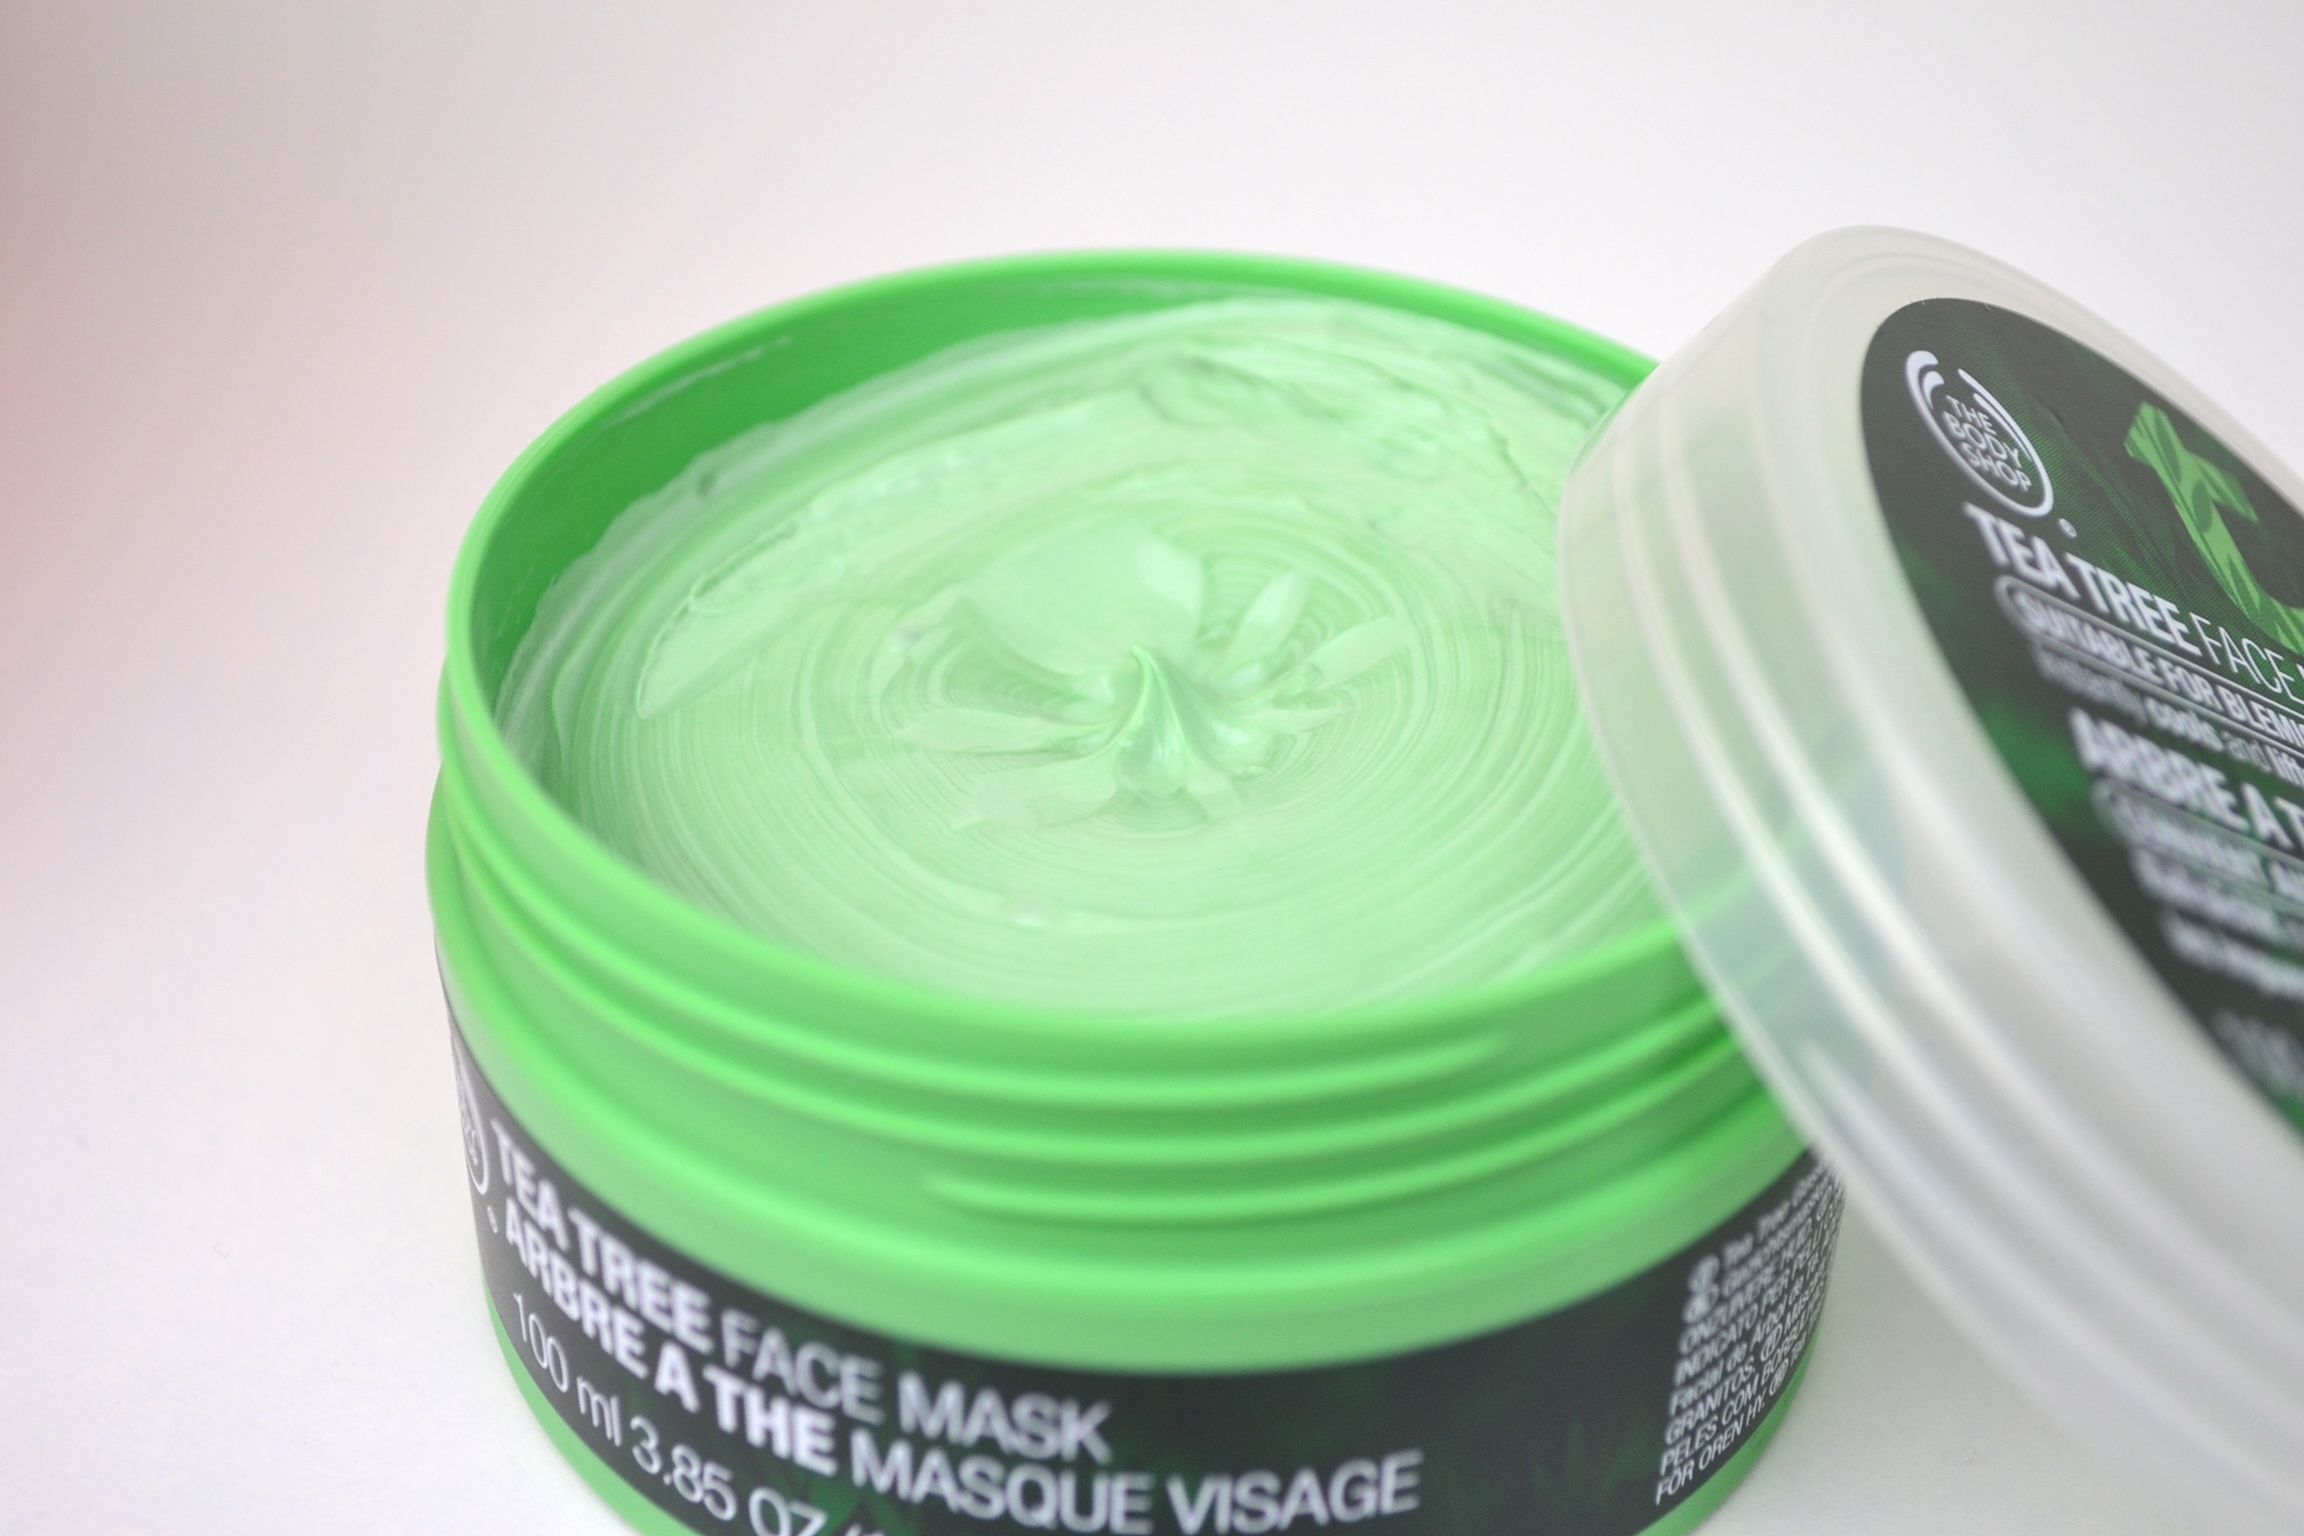 The Body Shop Tea Tree Face Mask Review